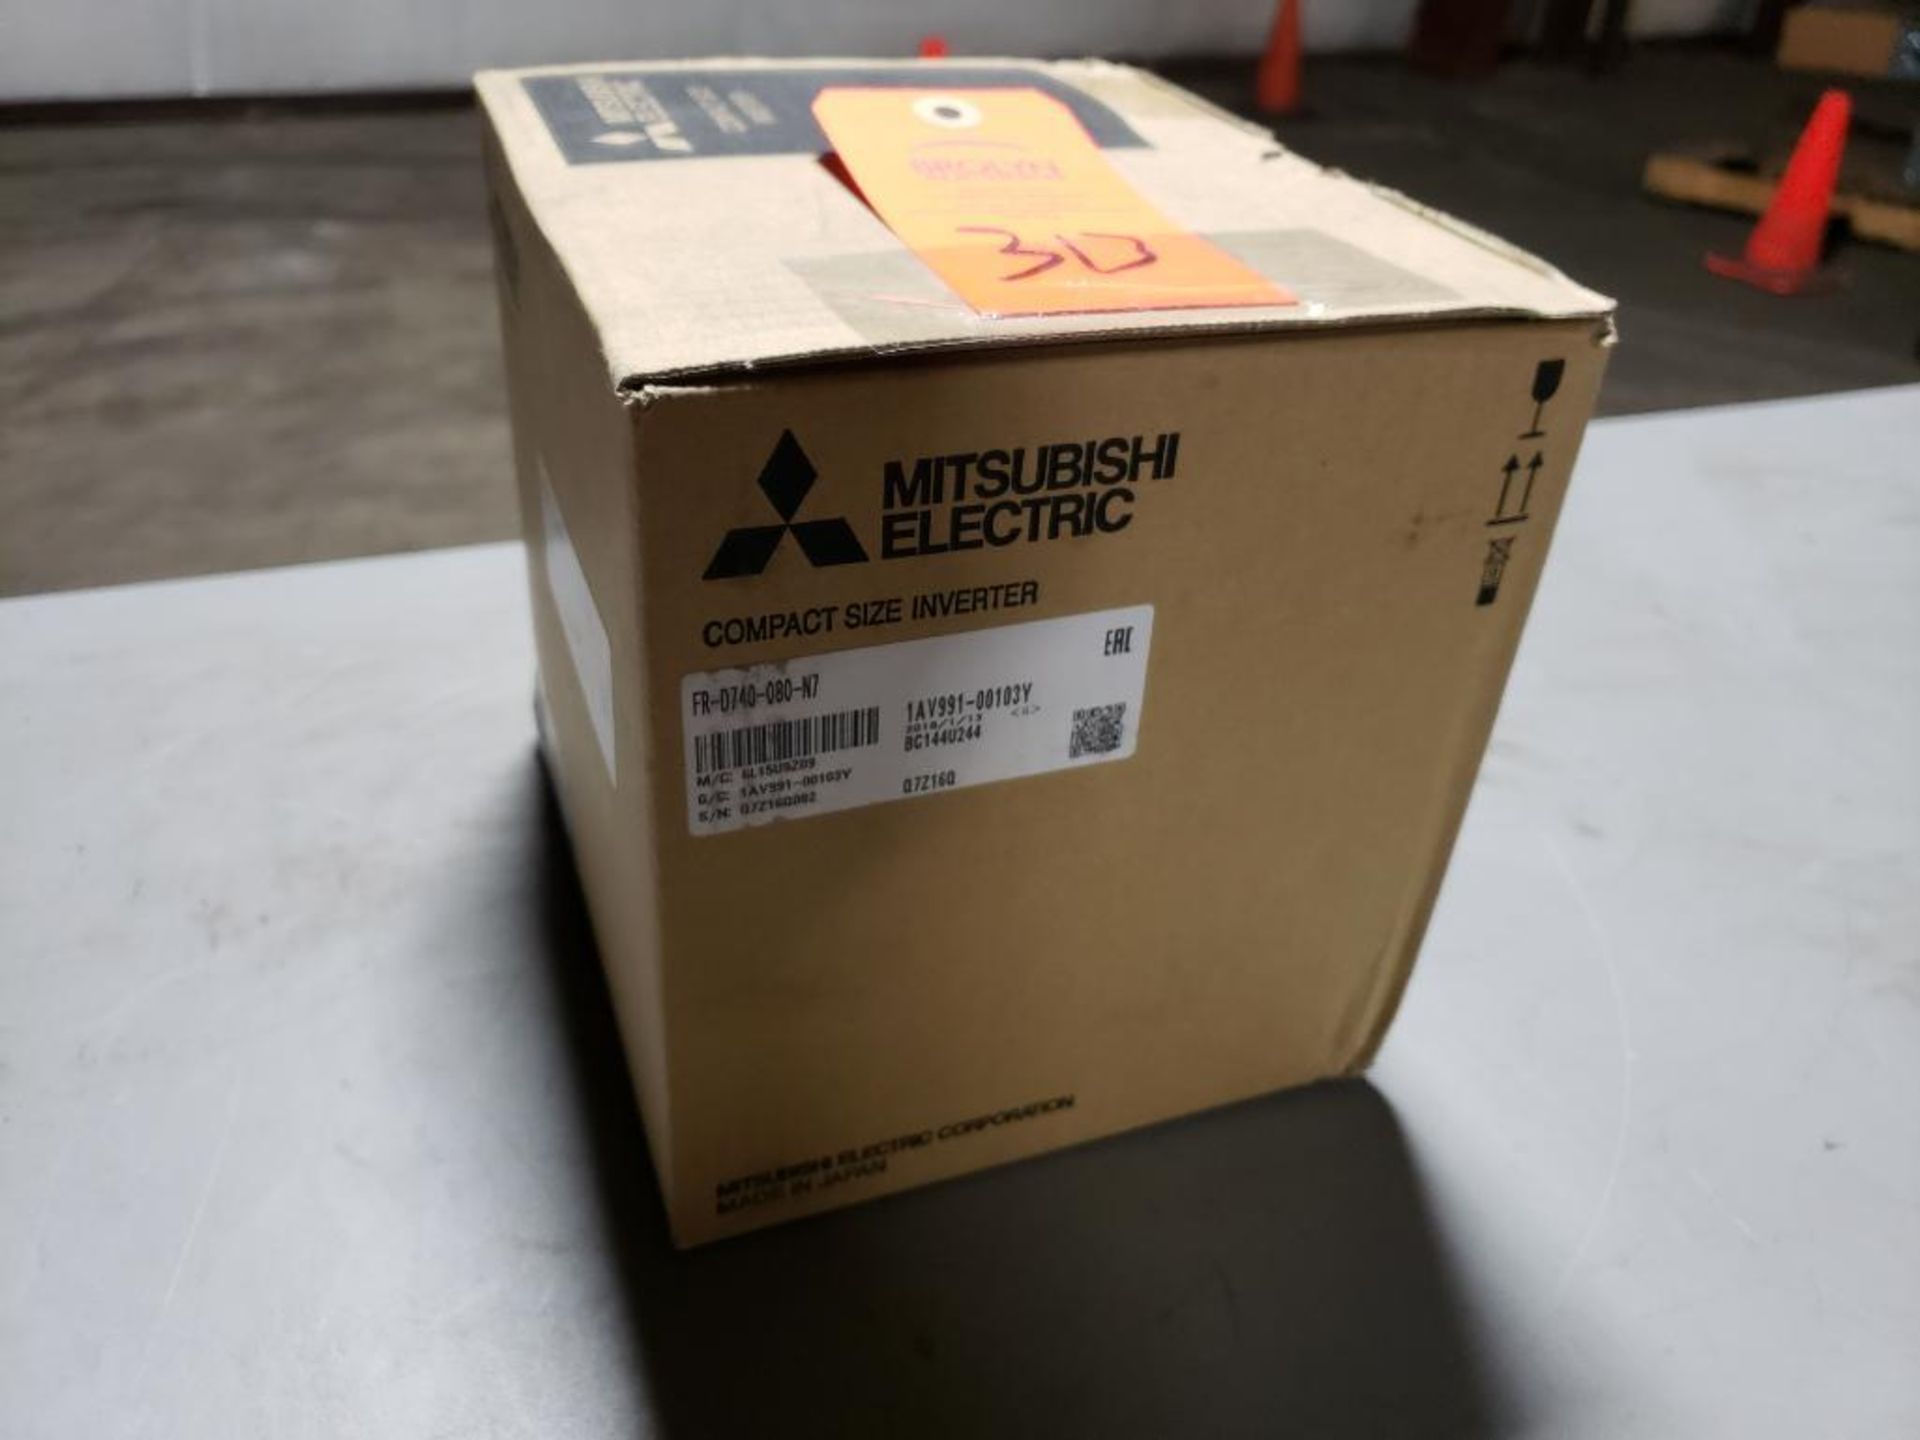 Mitsubishi inverter drive. Part number FR-D740-080-N7. New in box.